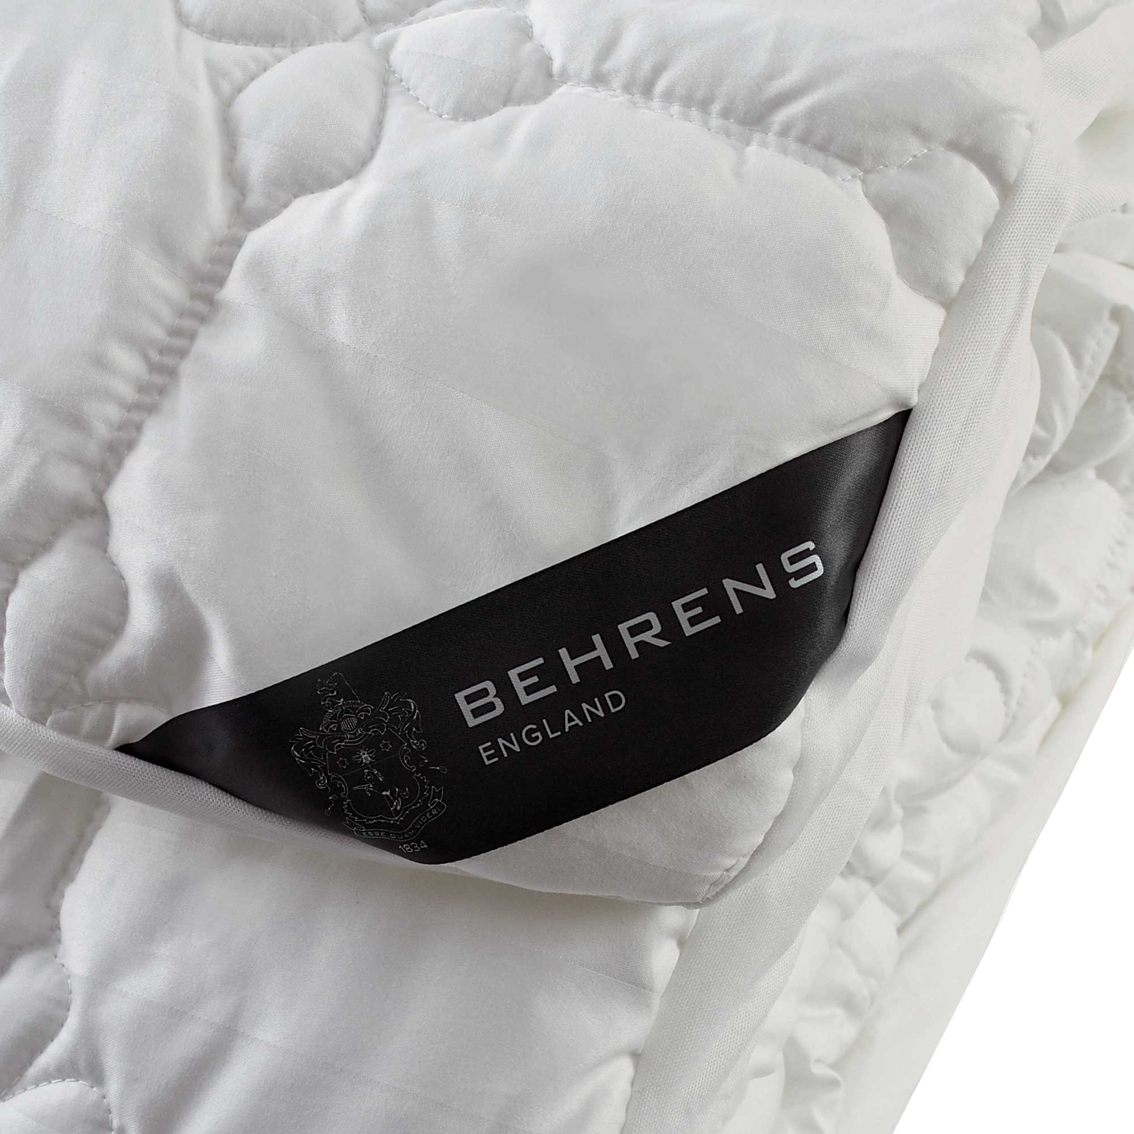 Behrens England Full Protection Mattress Pad - Image 5 of 5